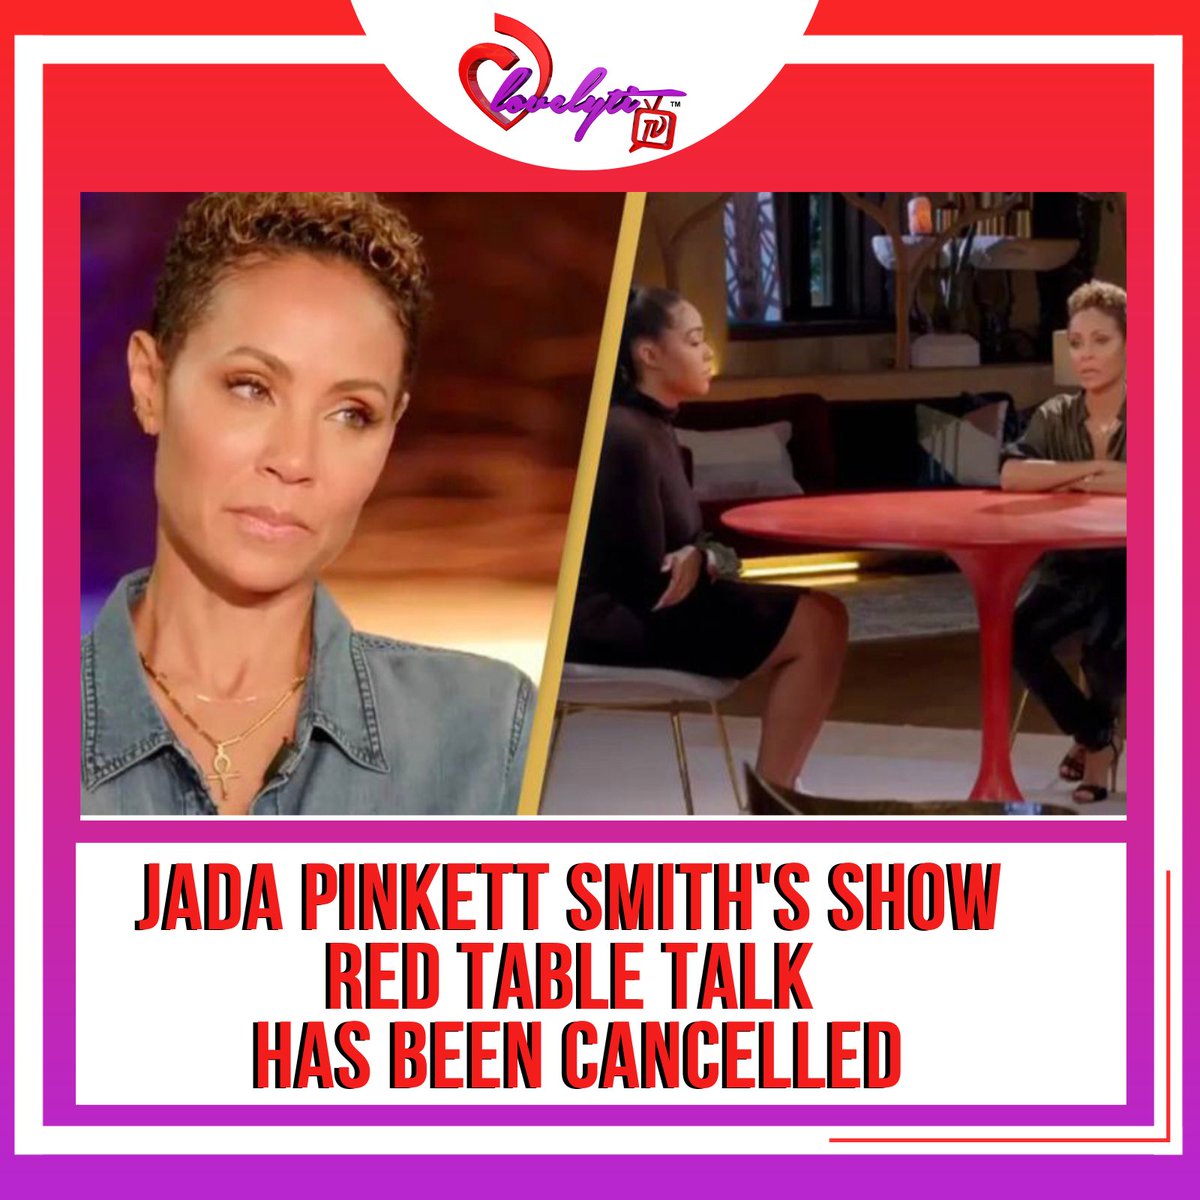 Jada Pinkett Smith's talk show Red Table Talk has been cancelled after 5 years. 
The show's production company, Westbrook which is owned by Jada and Will Smith, are shopping the series elsewhere, in the hope that it can be aired on another platform. 
thoughts?
#redtabletalk